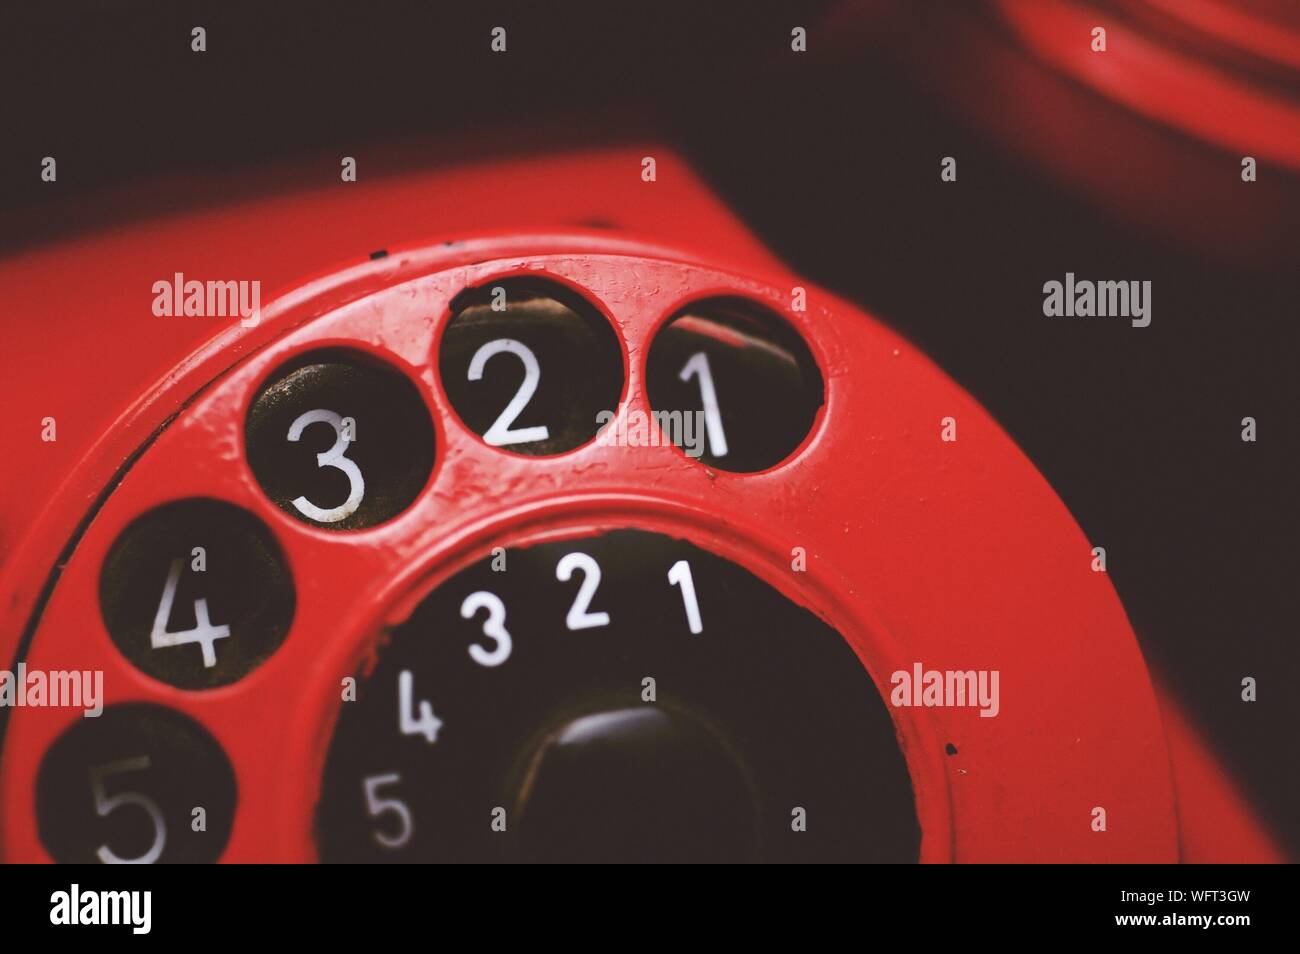 Lose-up Of Red Rotary Phone Stock Photo